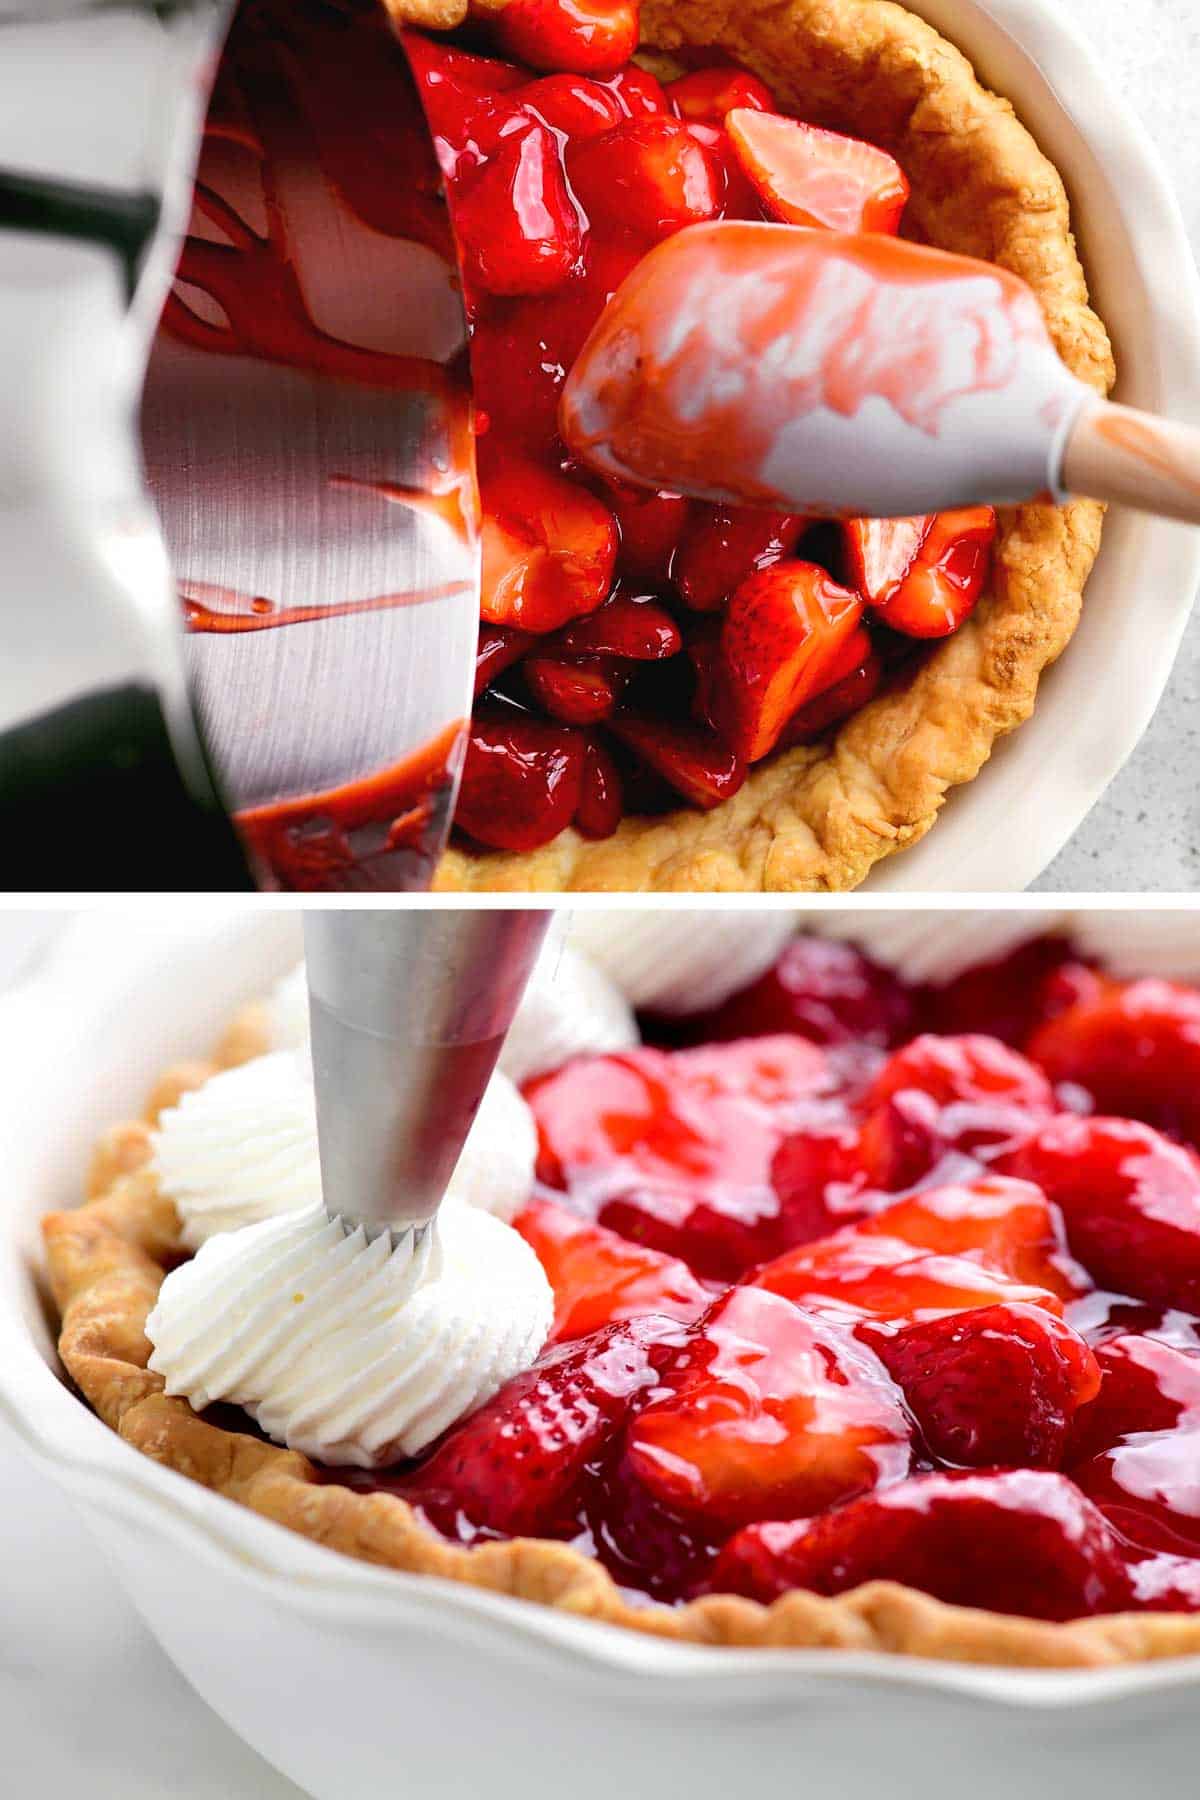 Adding strawberry pie filling to crust and topping the pie with whipped cream.